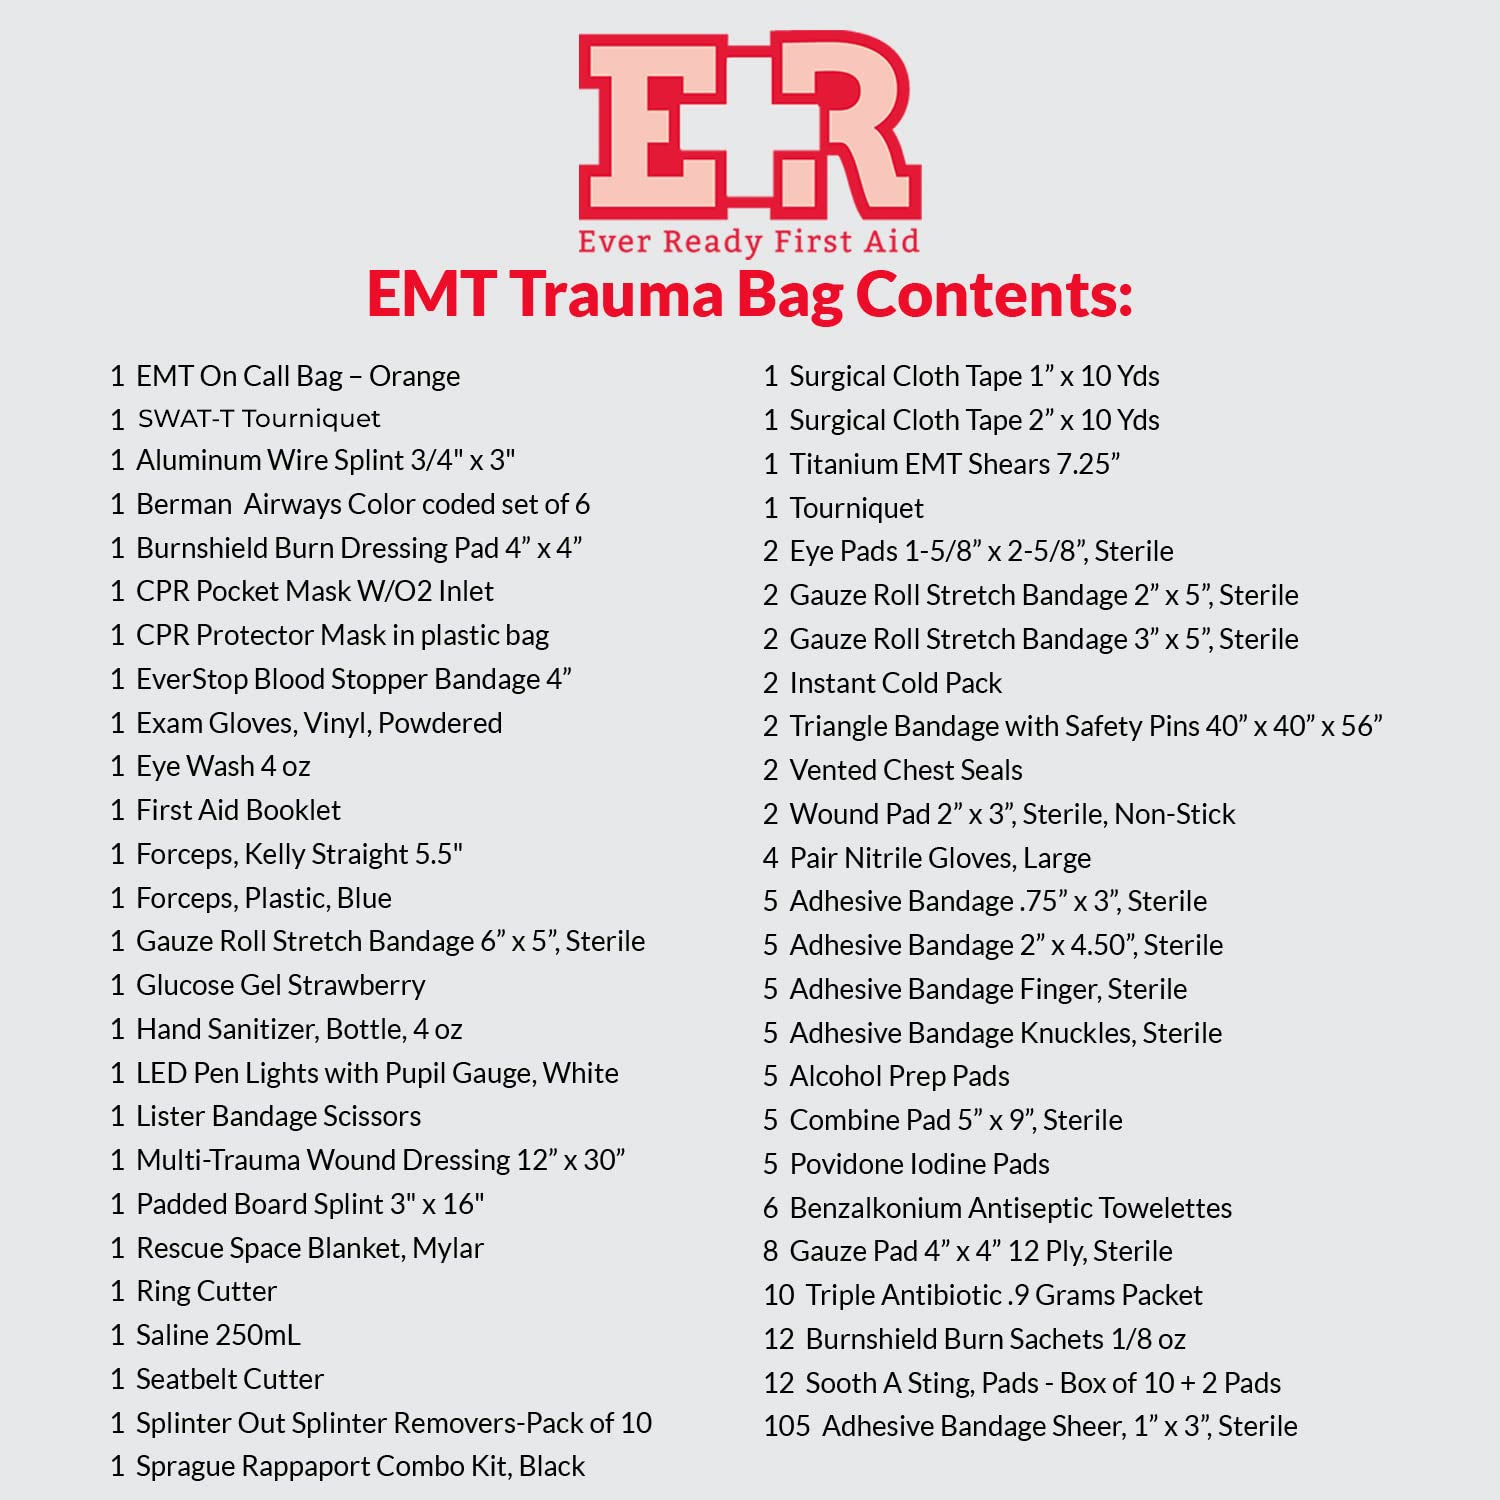 Ever Ready First Aid Fully Stocked EMT Trauma Kit Feat. Tourniquet, Chest Seals, SWAT-T Tourniquet, Control, Bandages, Shears, Gauze Pads and Rolls (Orange)